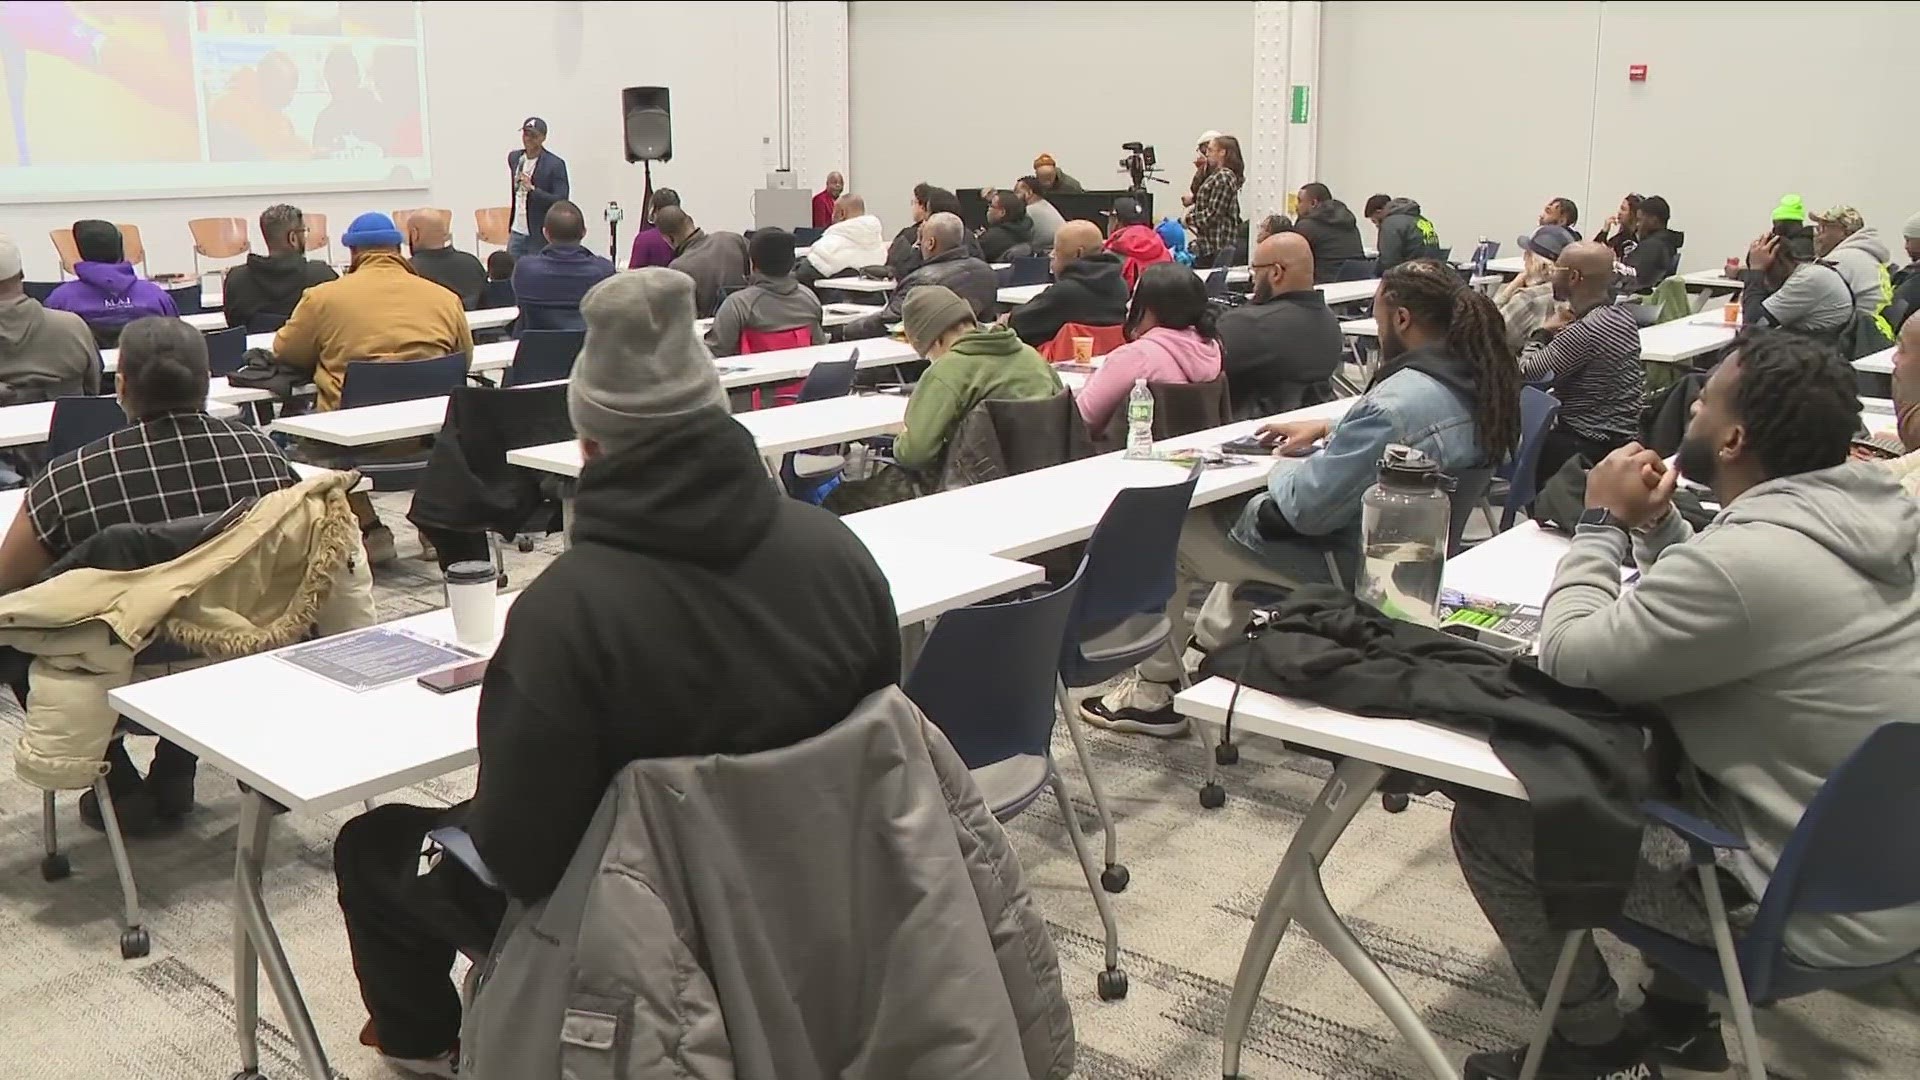 Over 100 black men and their sons attended the workshop "It's Okay To Not Be Okay" at the Northland Workforce Training Center on Saturday.